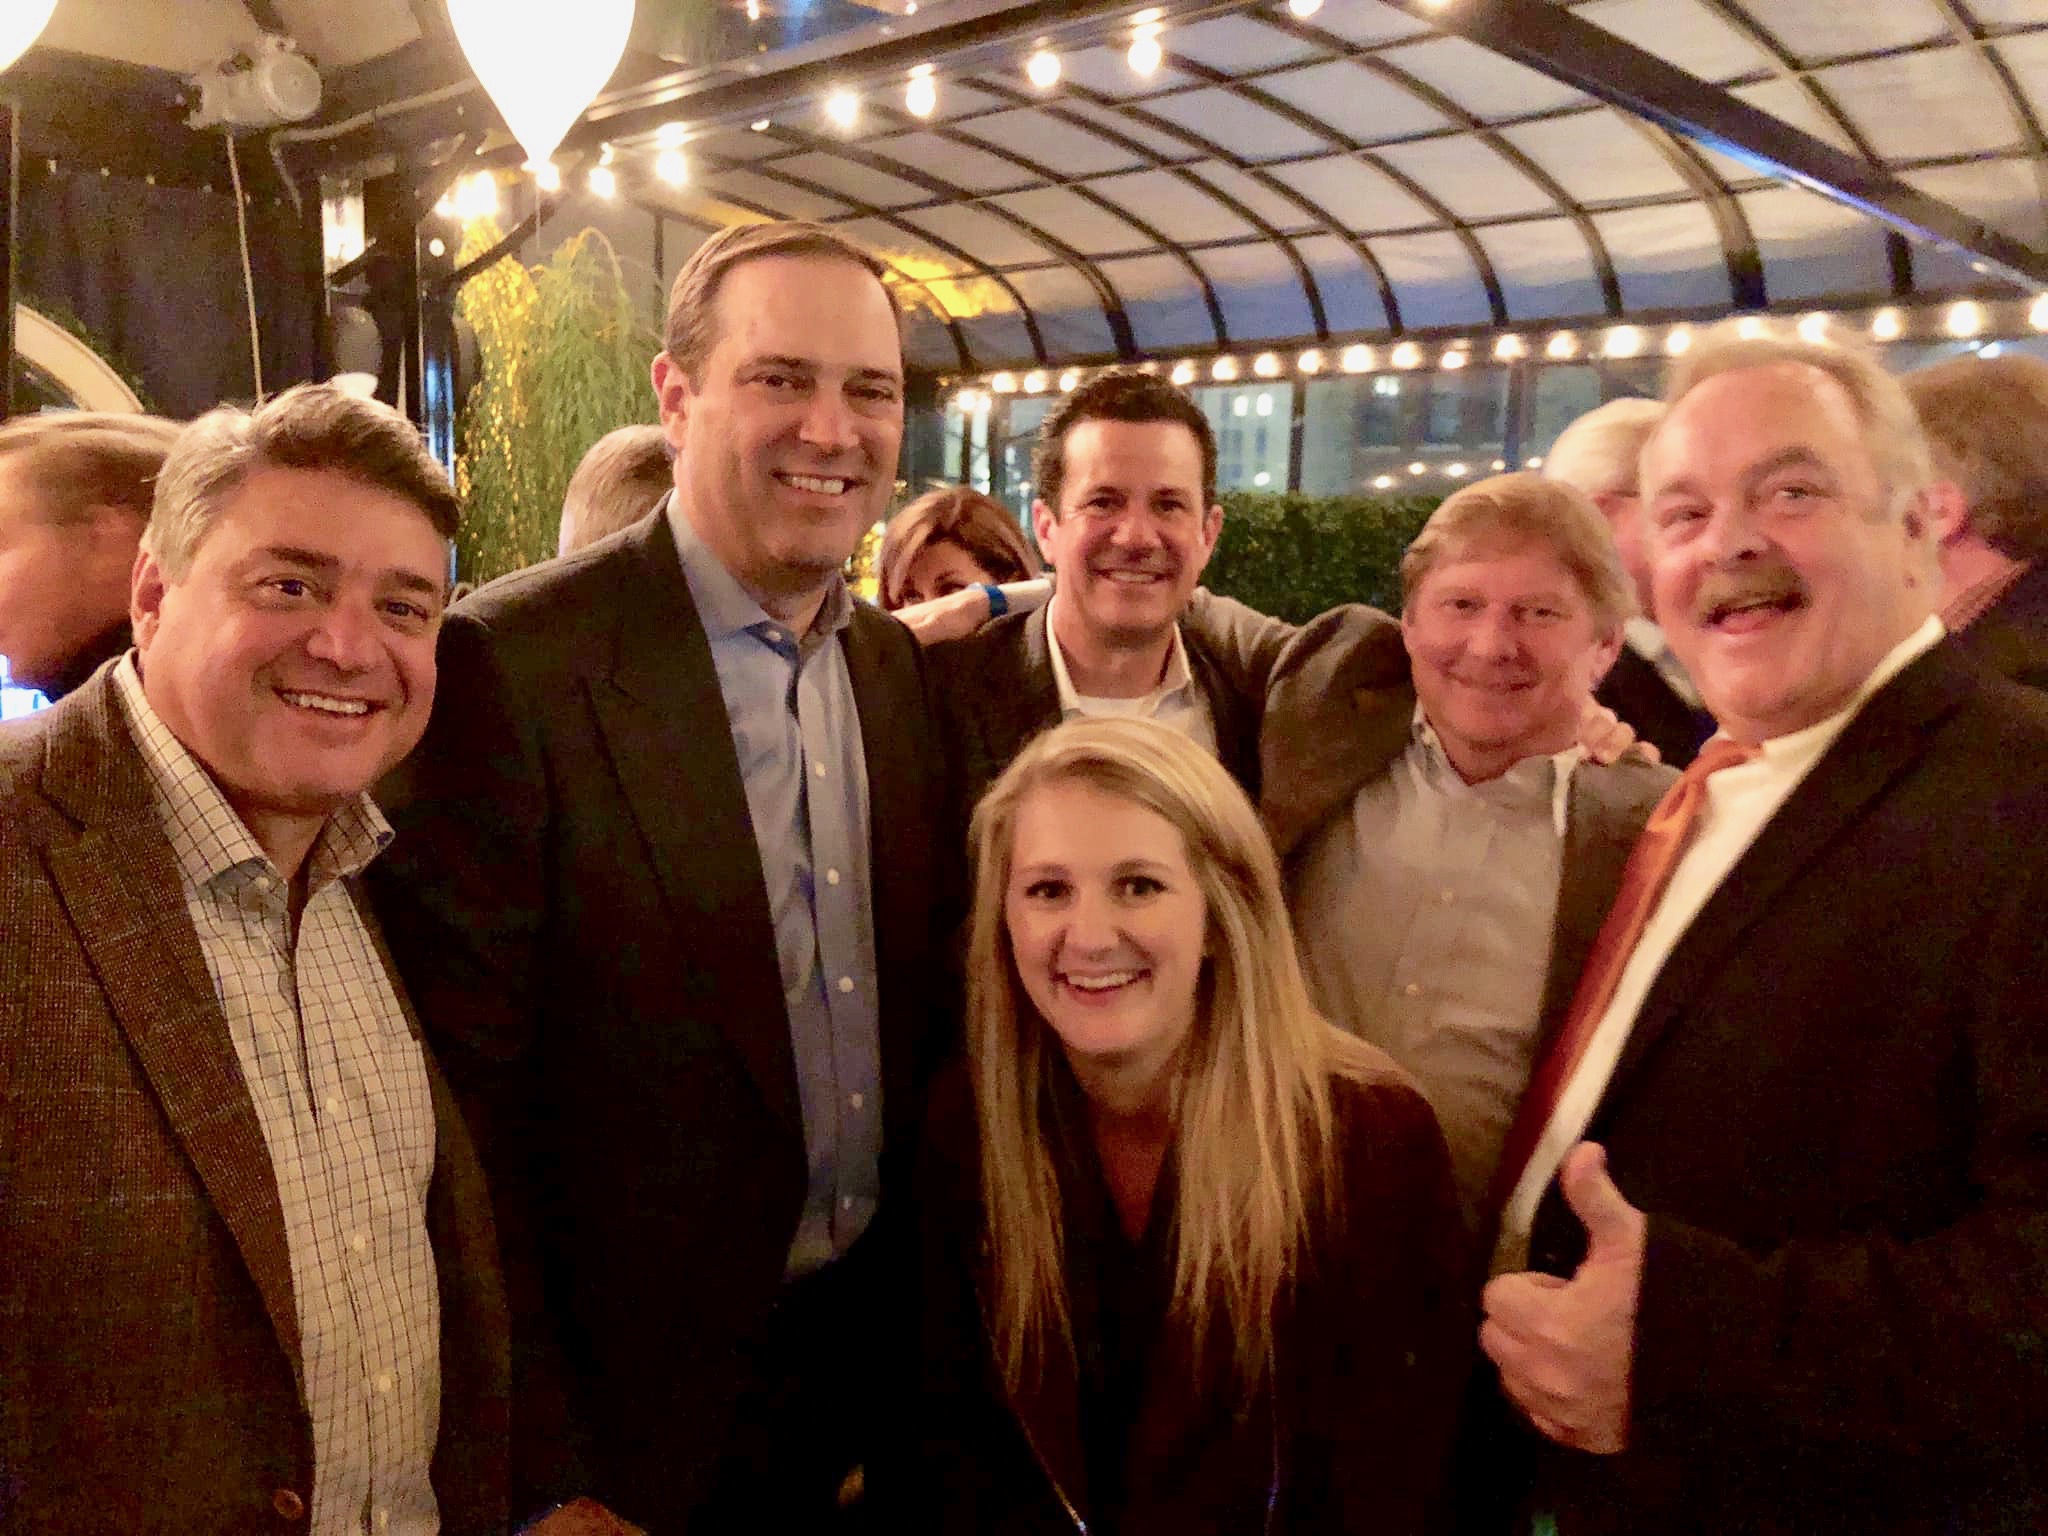 Blakely with her Dad, co-workers, and our CEO Chuck Robbins at a retirement party.